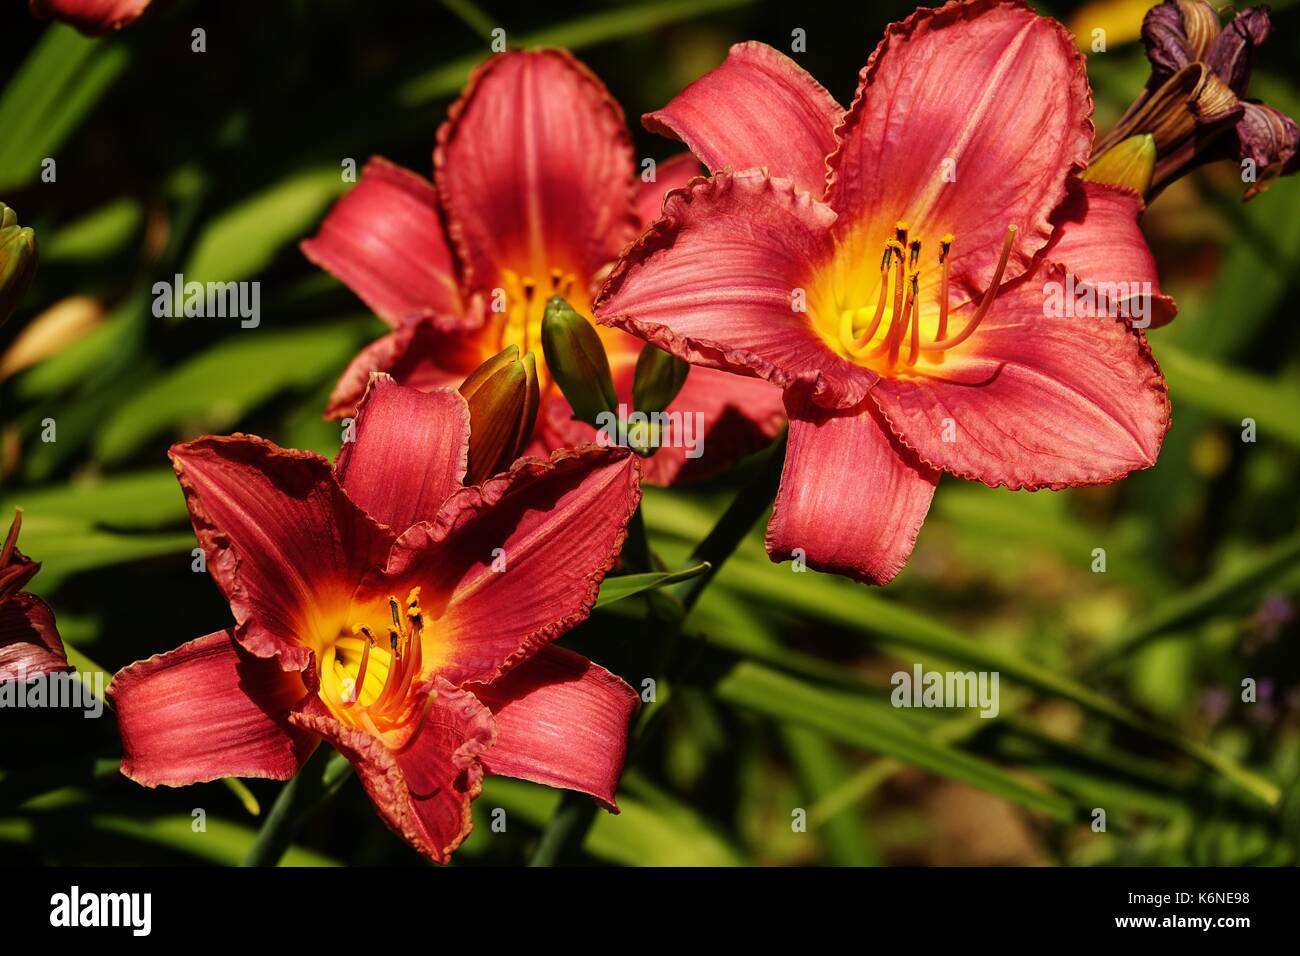 Tiger lily blooming Stock Photo